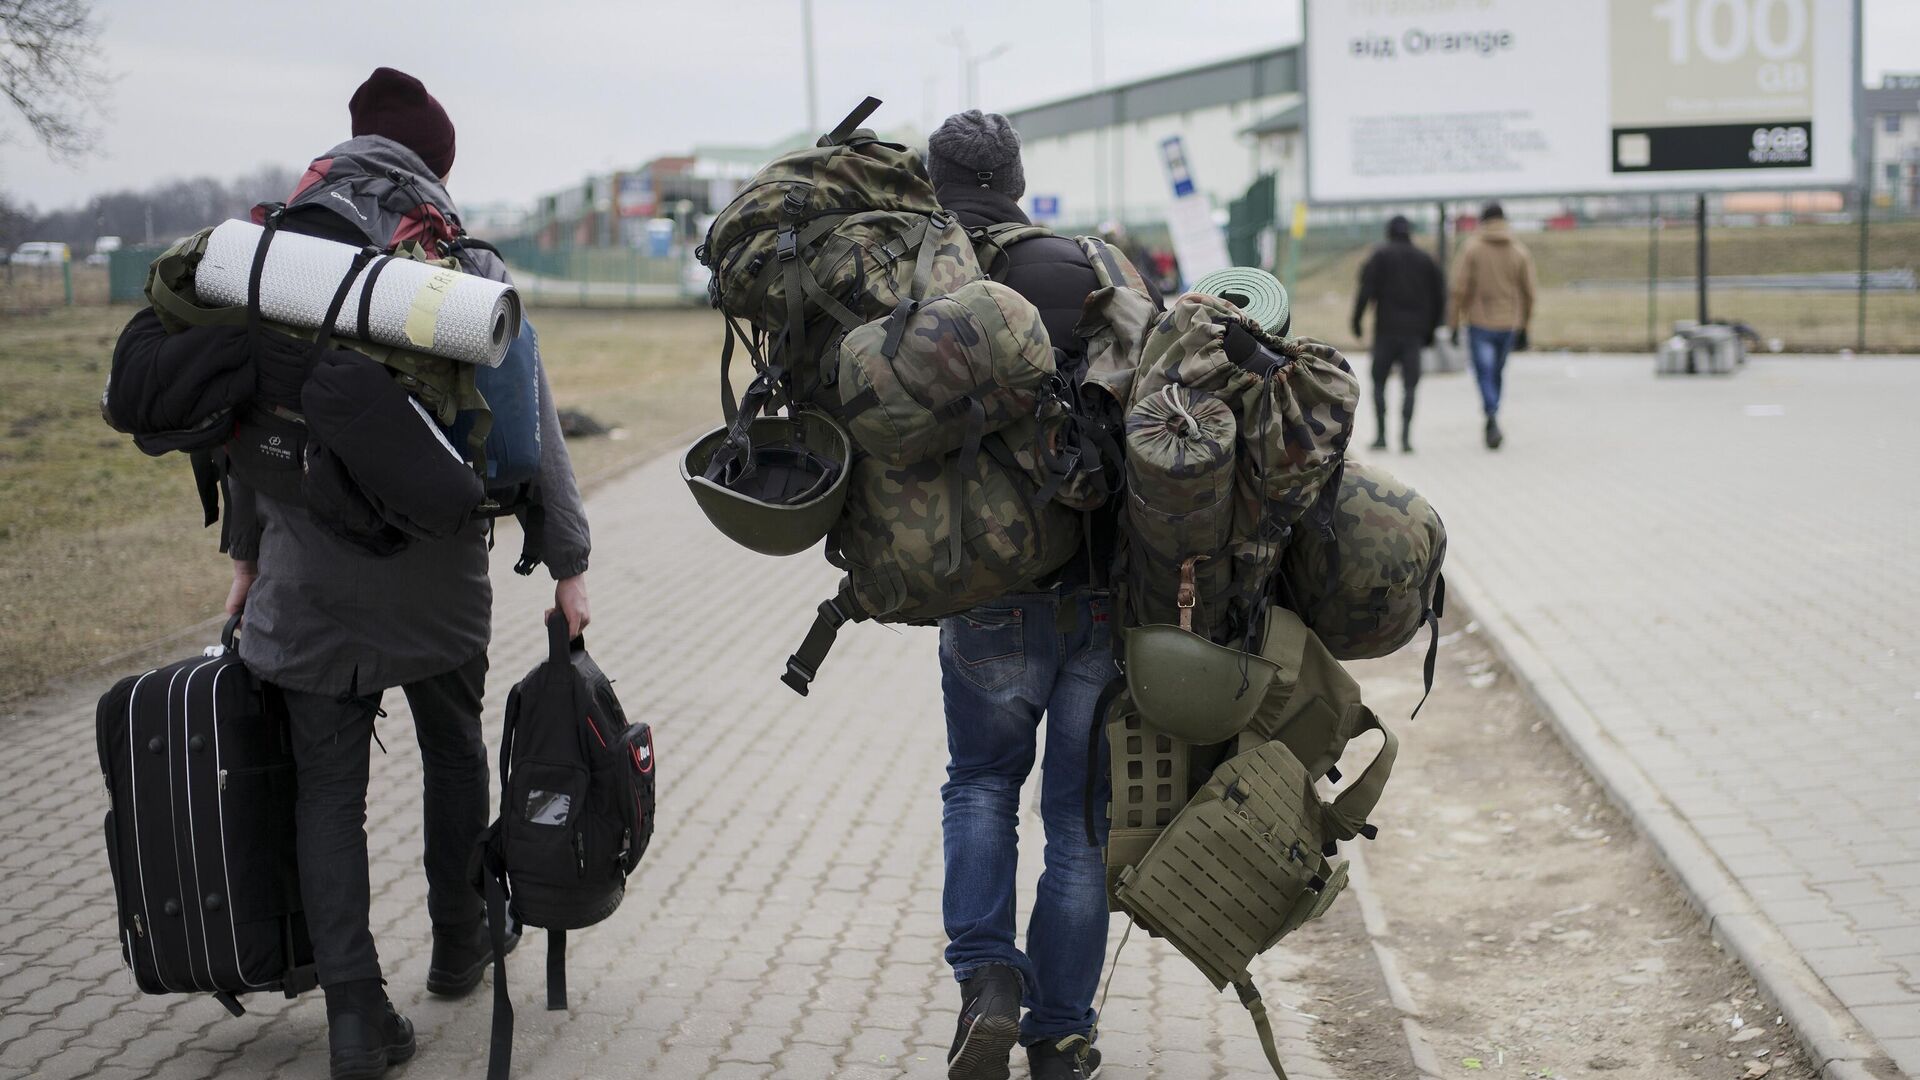 A man carries combat gear as he leaves Poland to fight in Ukraine, at the border crossing in Medyka, Poland, Wednesday, March 2, 2022 - Sputnik International, 1920, 25.05.2022